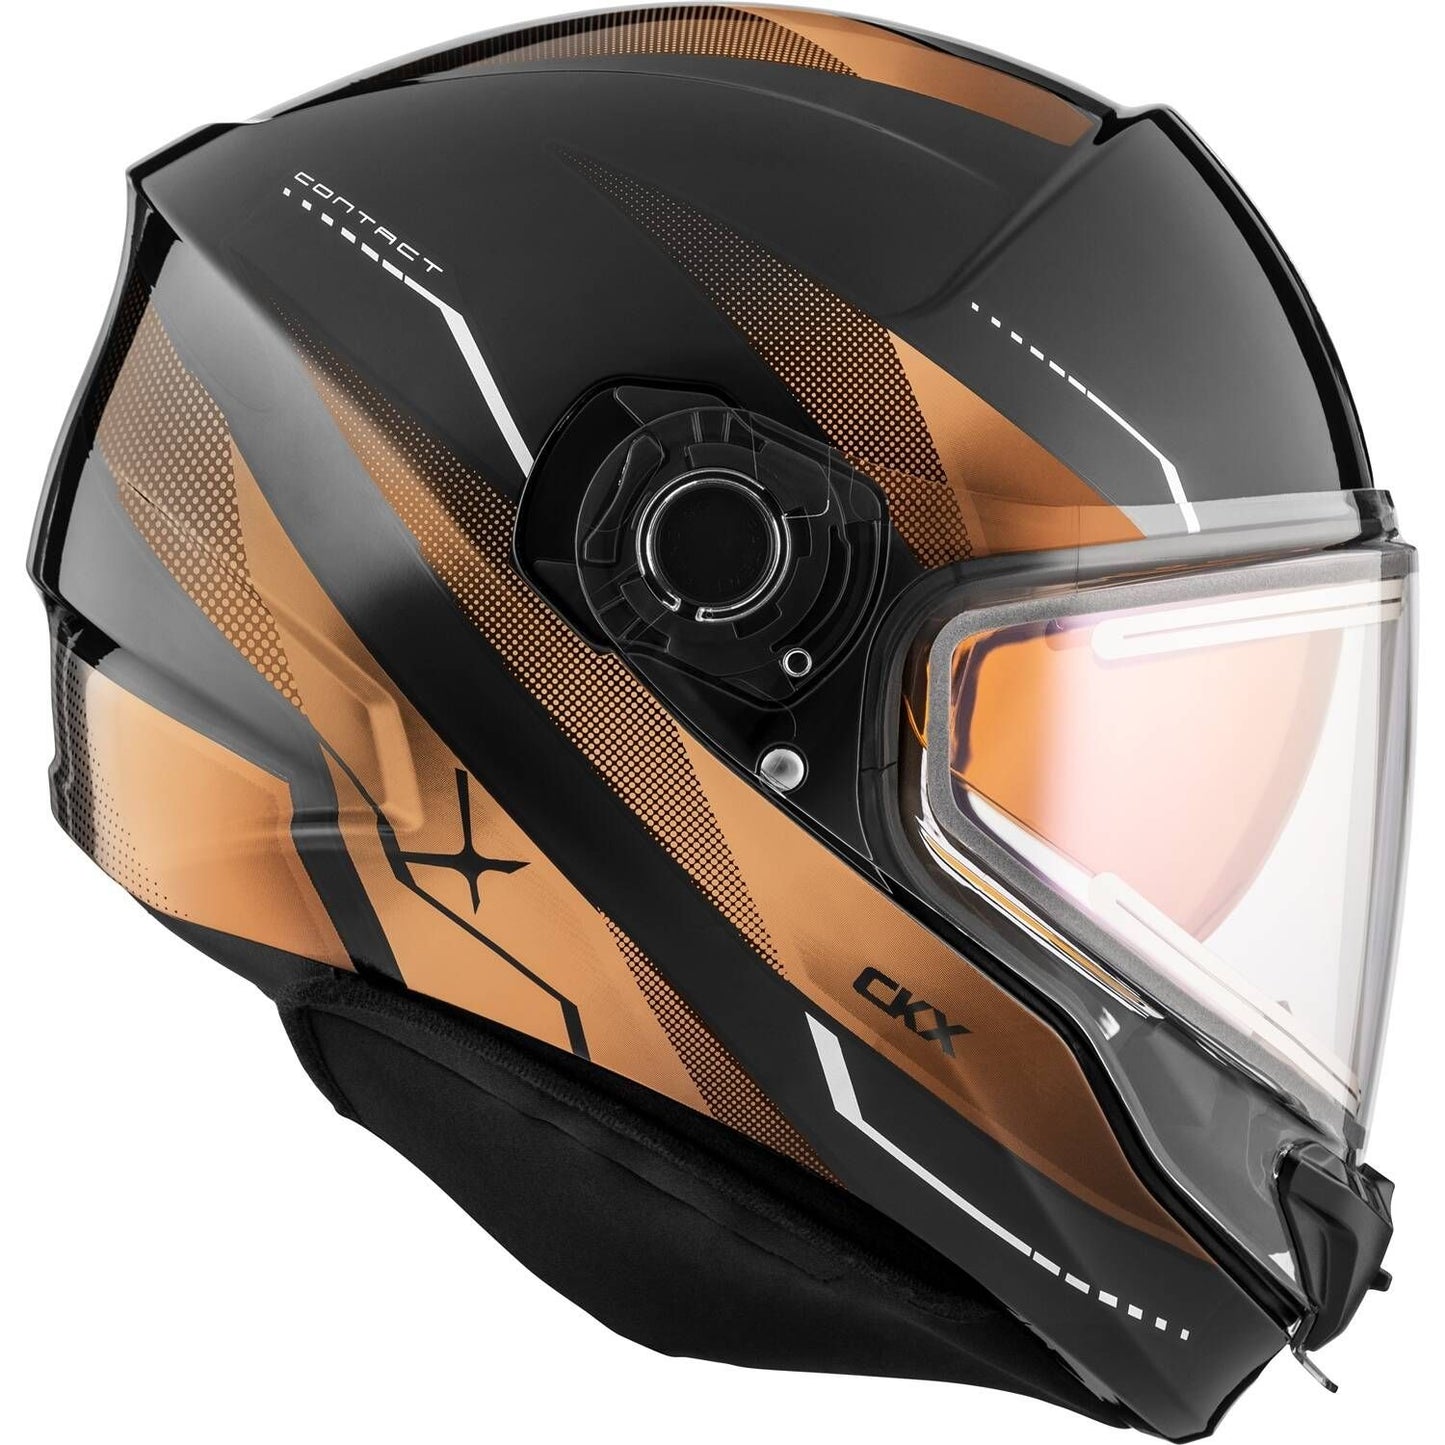 CKX Contact Full Face Snowmobile Helmet